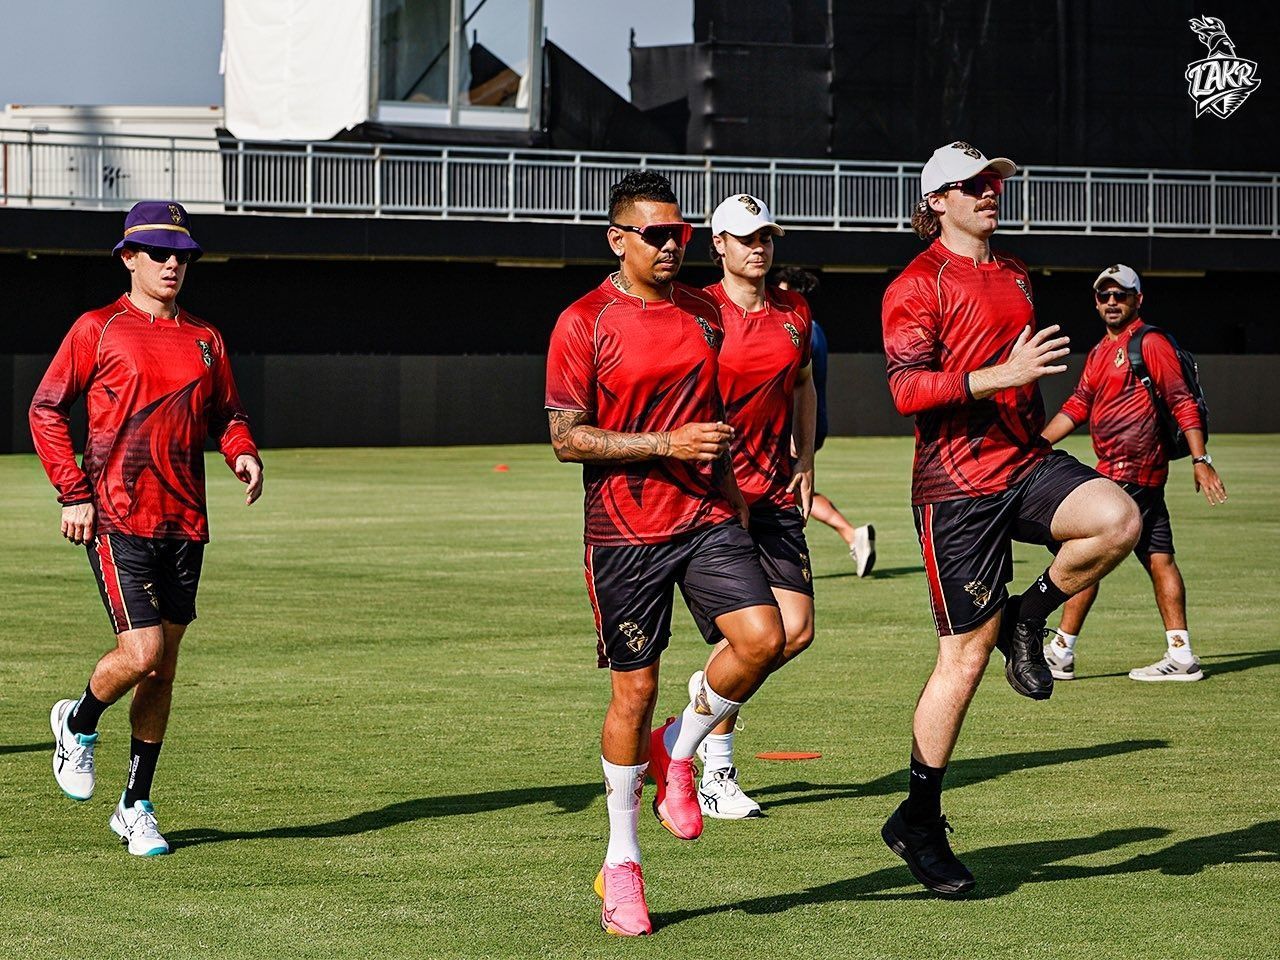 Skipper Sunil Narine warming up with some Los Angeles Knight Riders teammates. (Pic: @LA_KnightRiders/ Twitter)